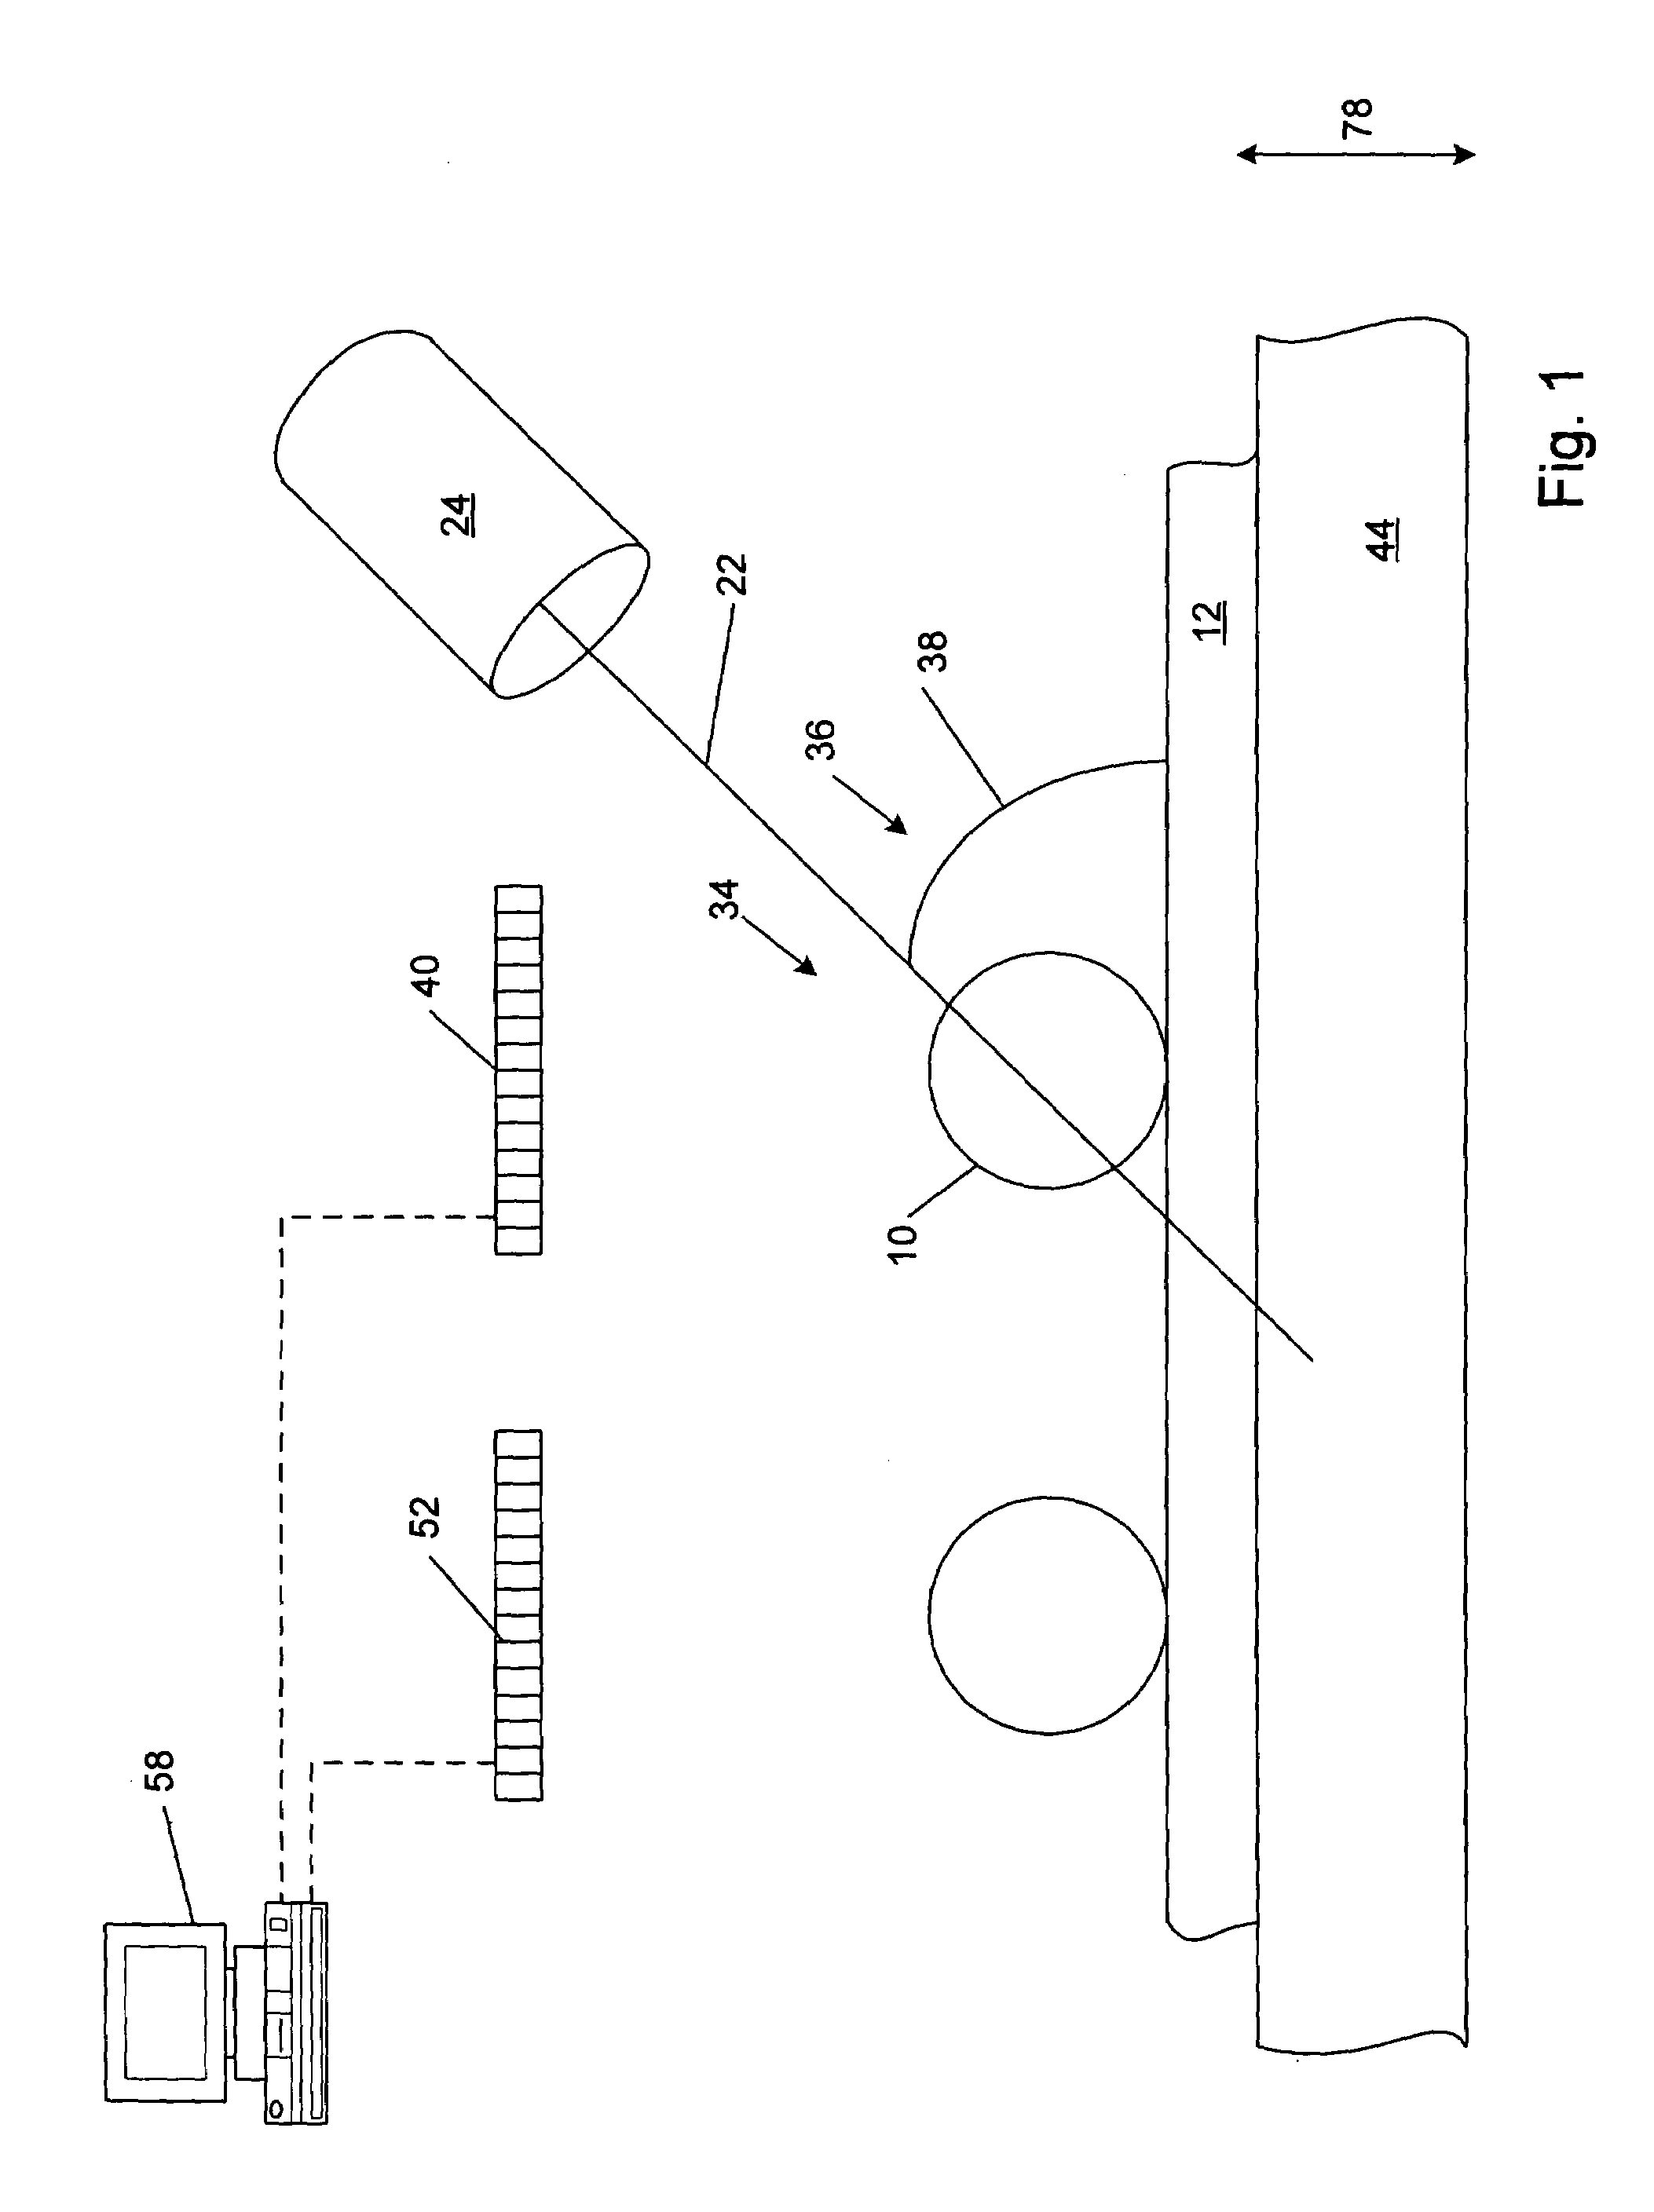 Systems and methods for multi-dimensional metrology and/or inspection of a specimen